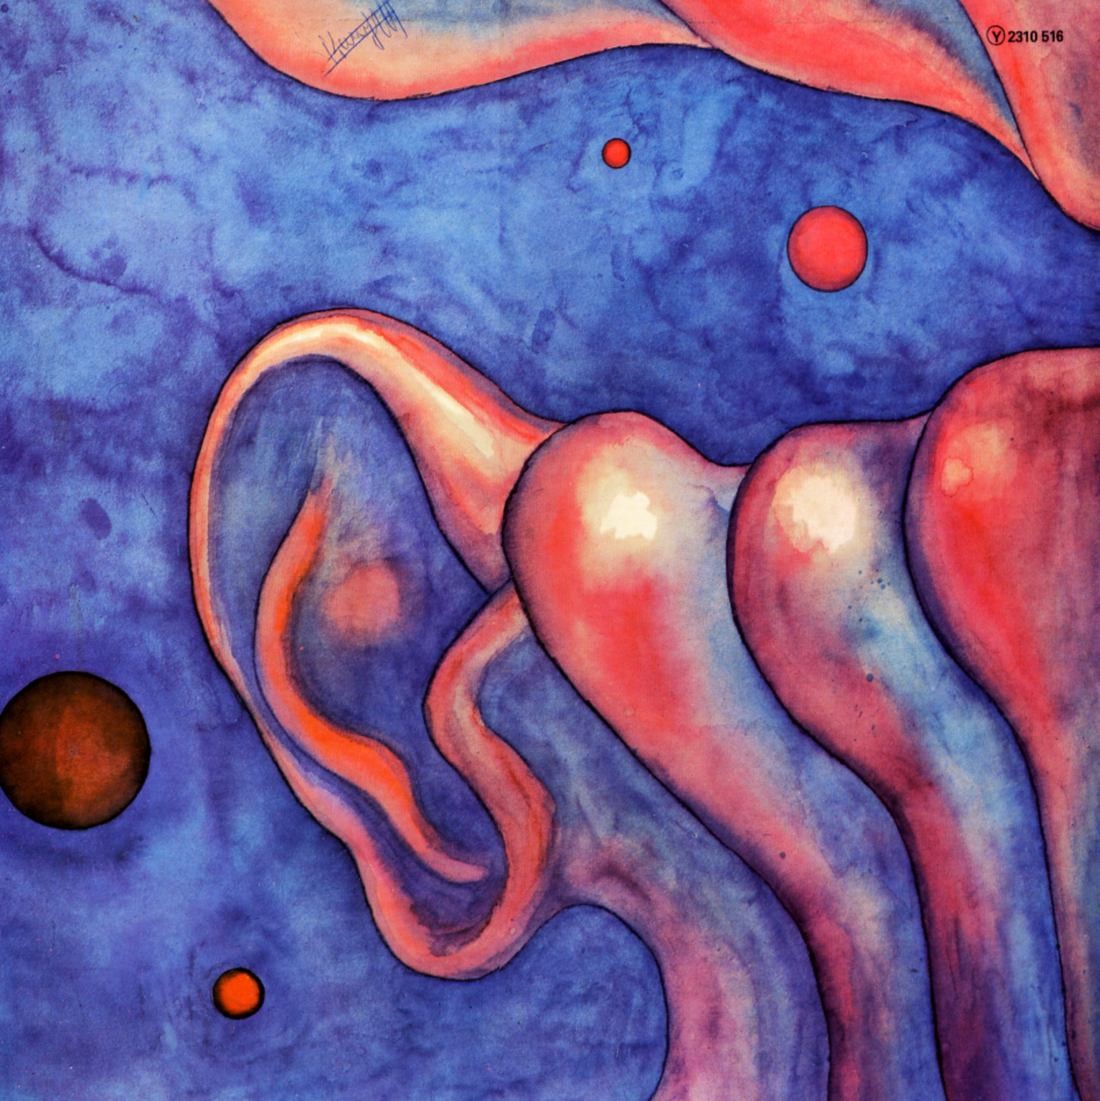 King Crimson_In the court_2